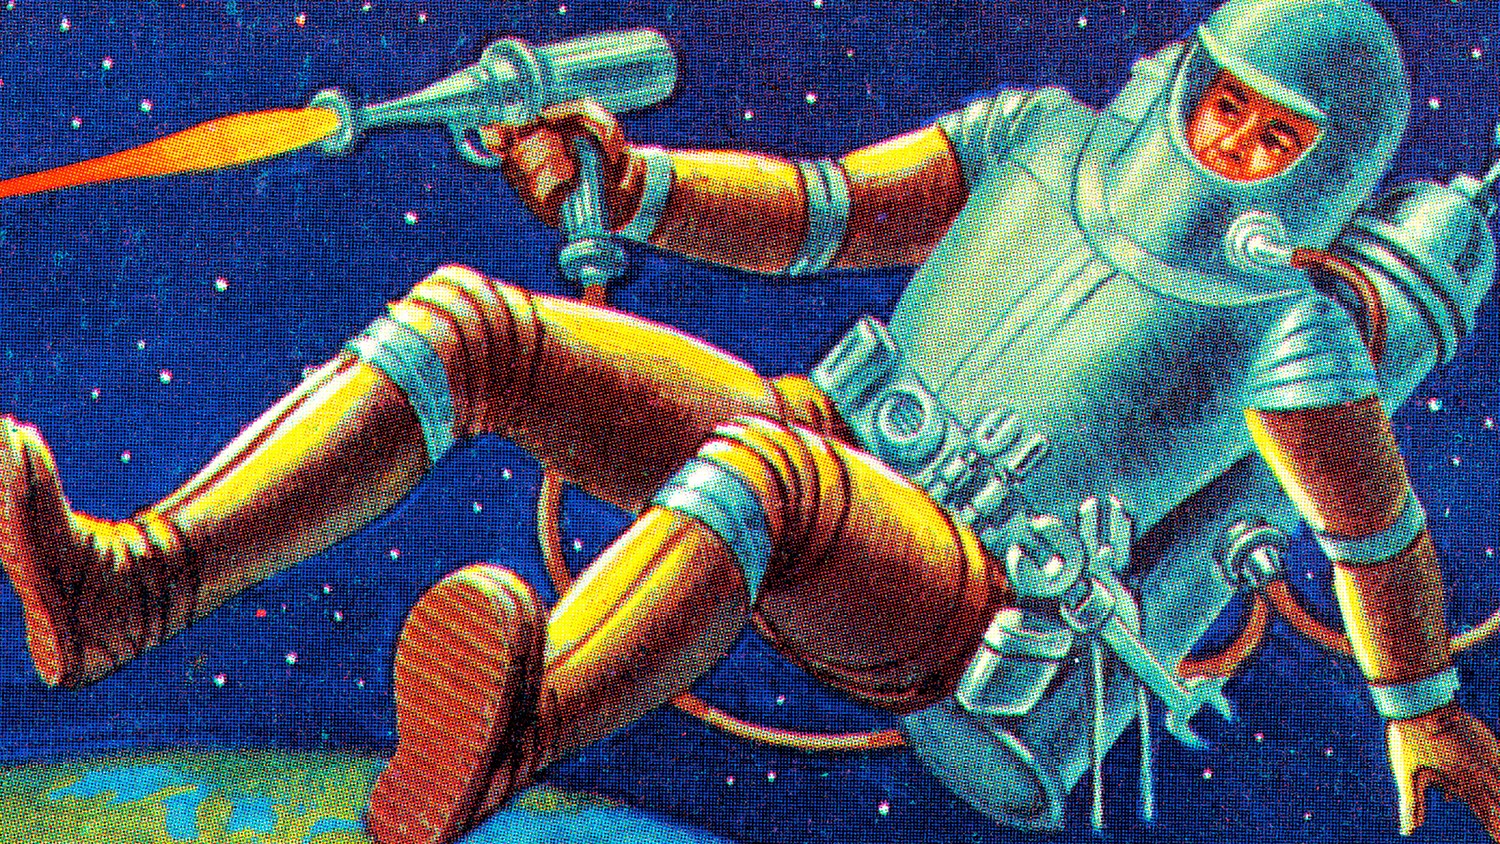 Retro illustration of an astronaut in a space suit floating in space, using a handheld thruster to maneuver, with a backdrop of stars and part of Earth visible.